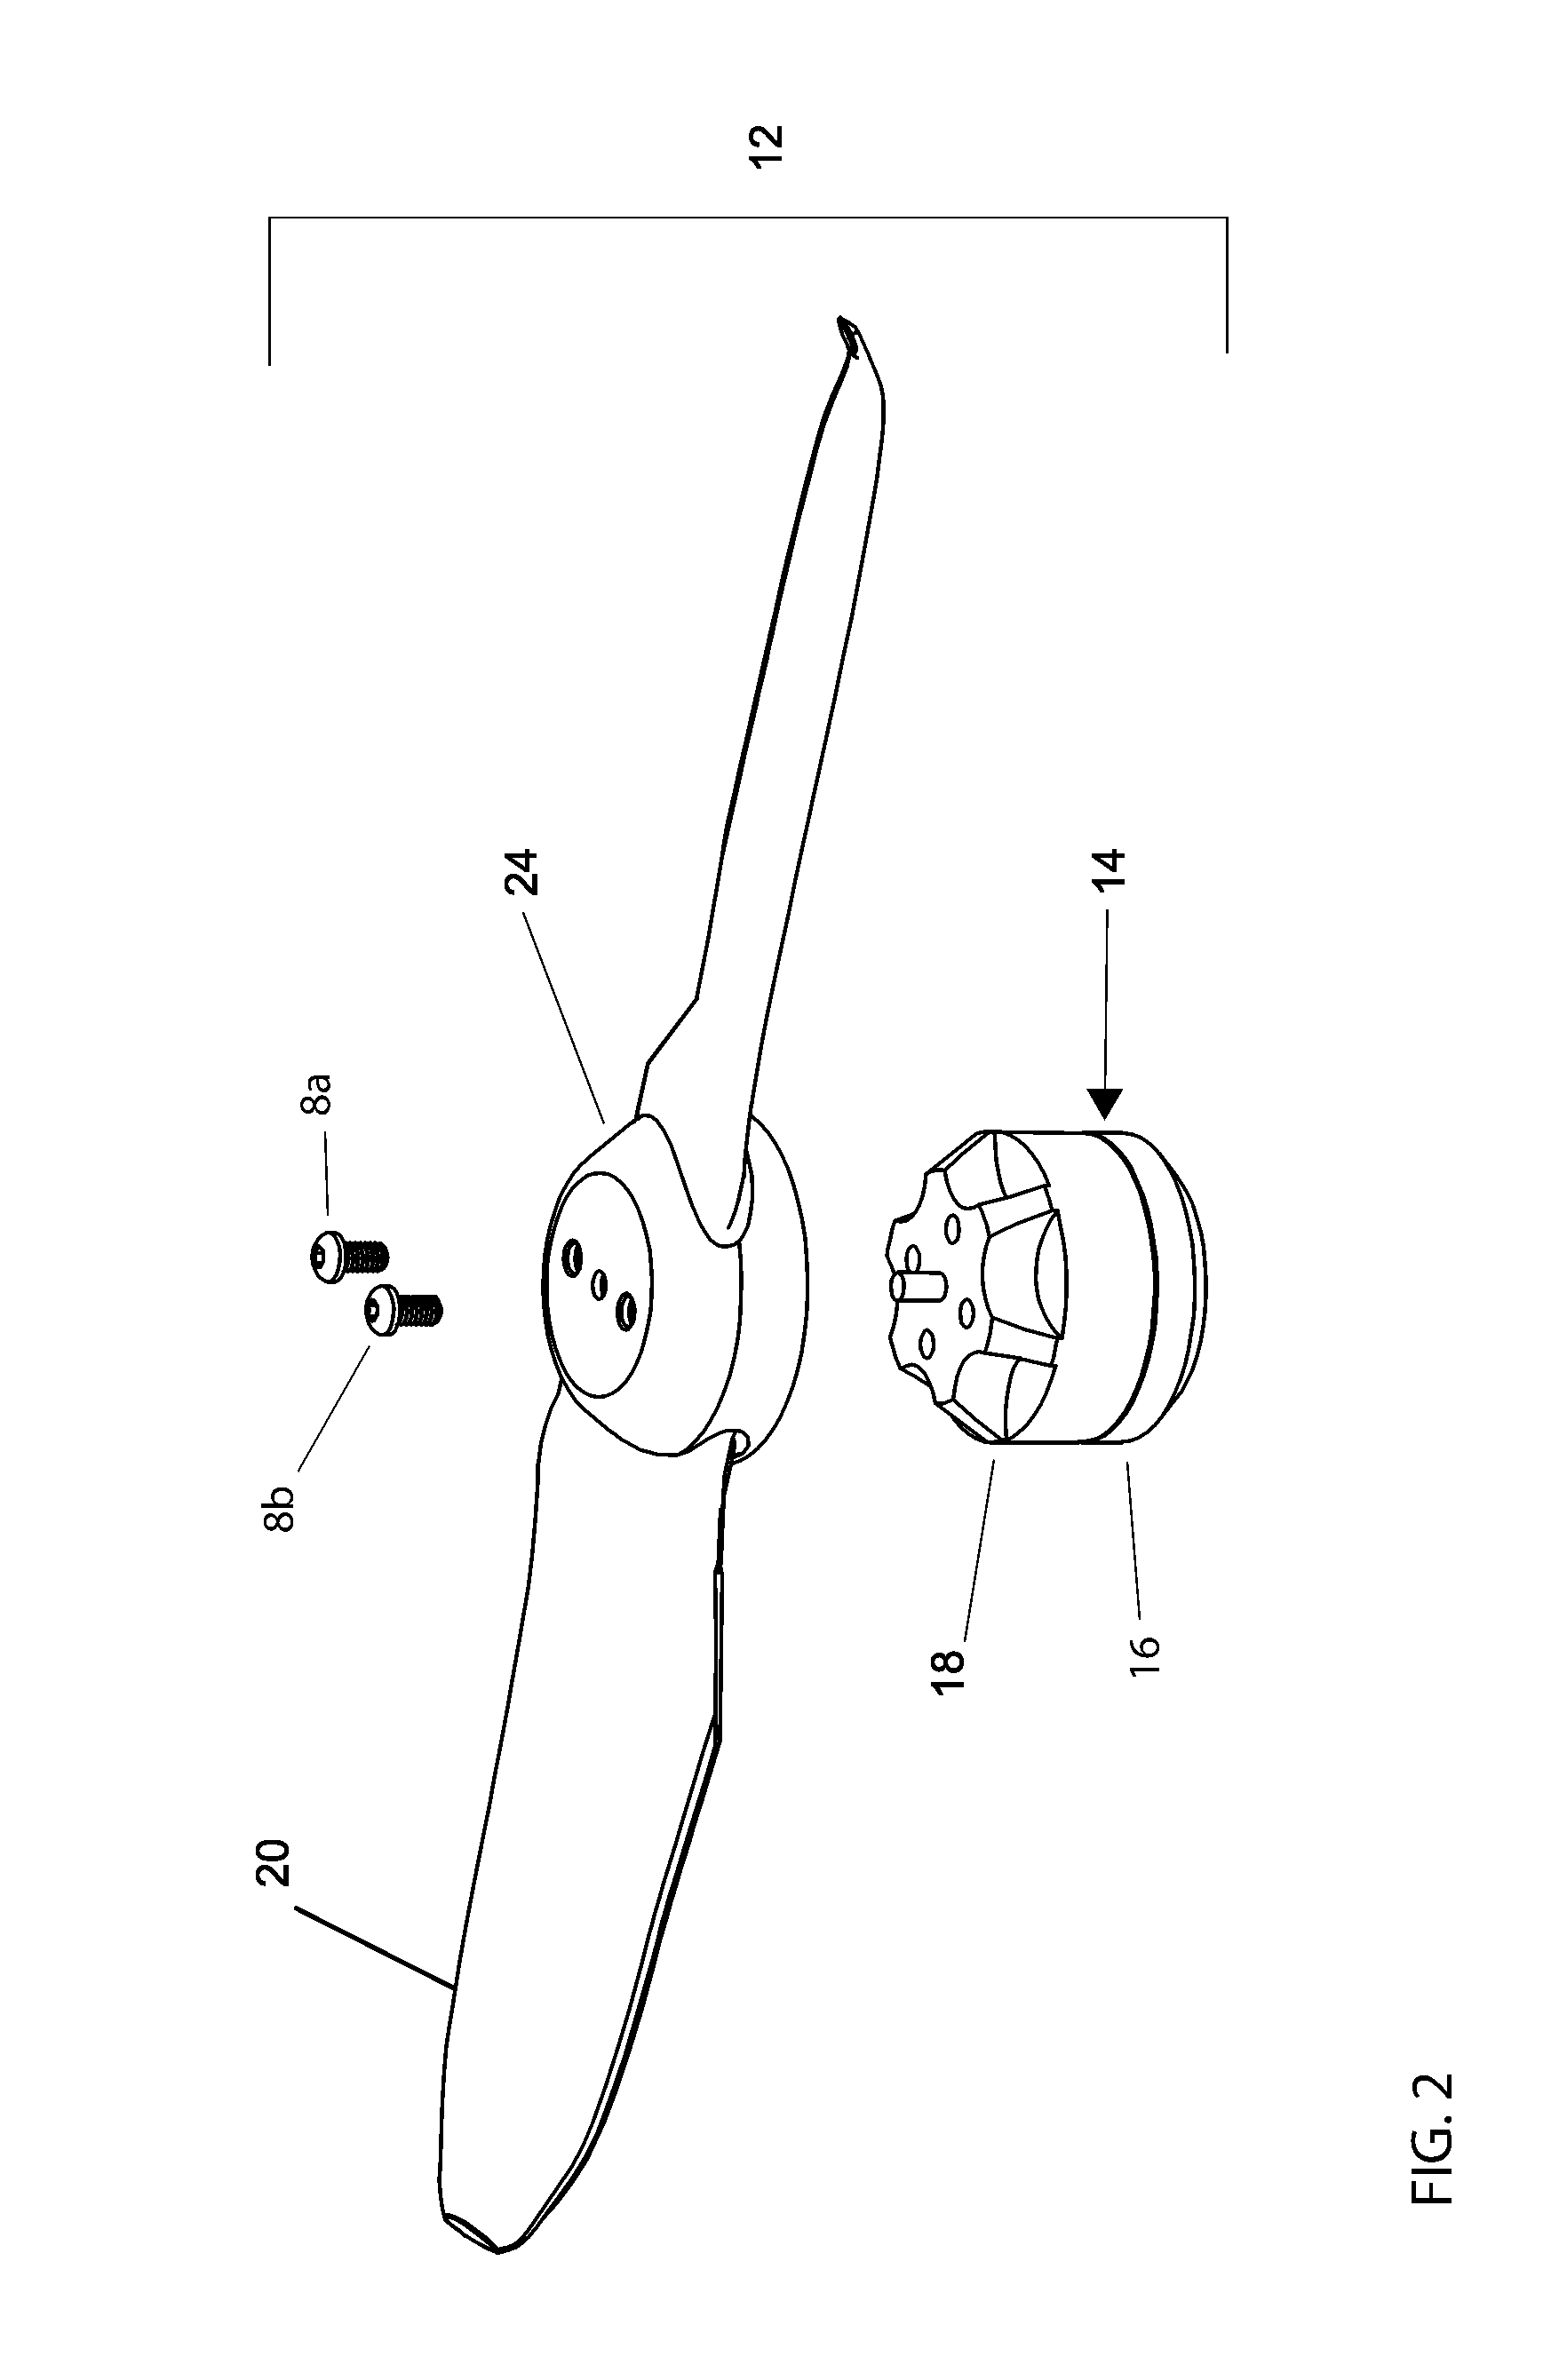 Propeller-motor assembly for efficient thermal dissipation